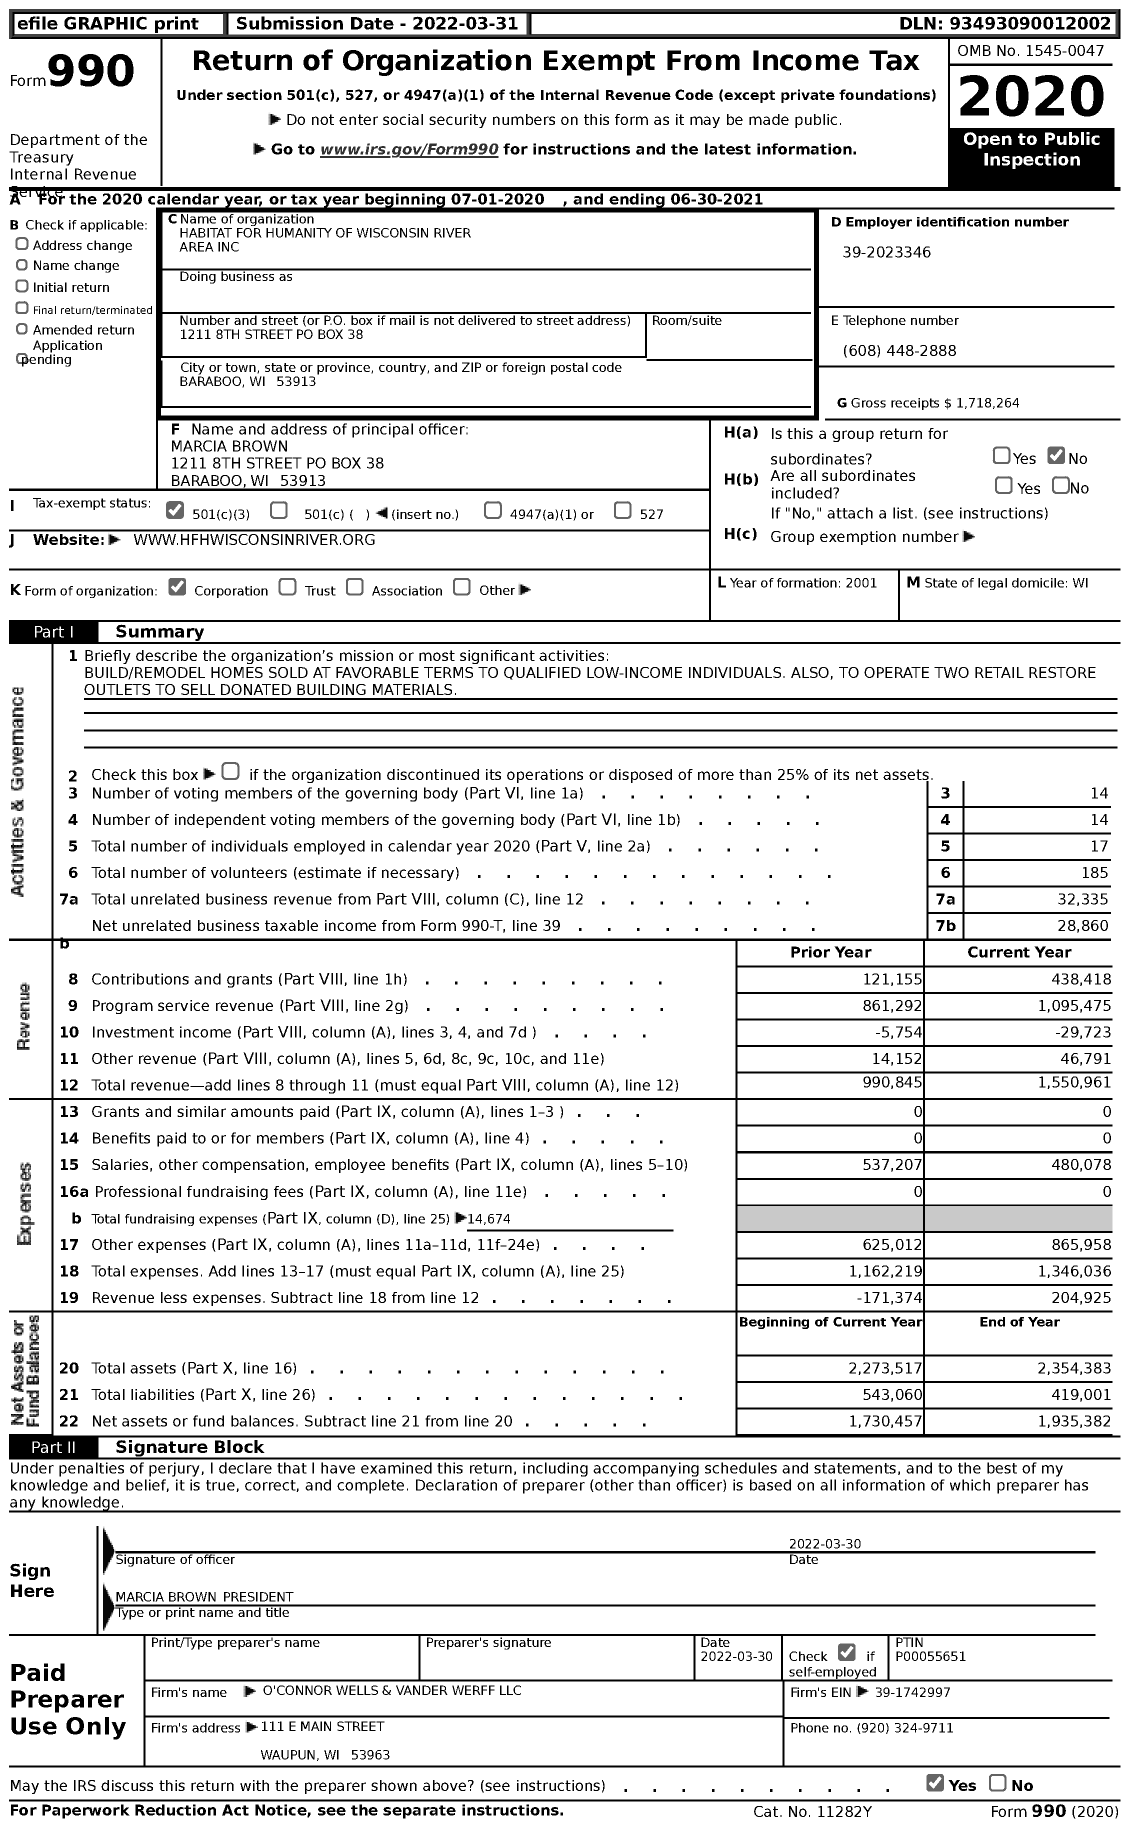 Image of first page of 2020 Form 990 for Habitat for Humanity - HFH of Wisconsin River Area